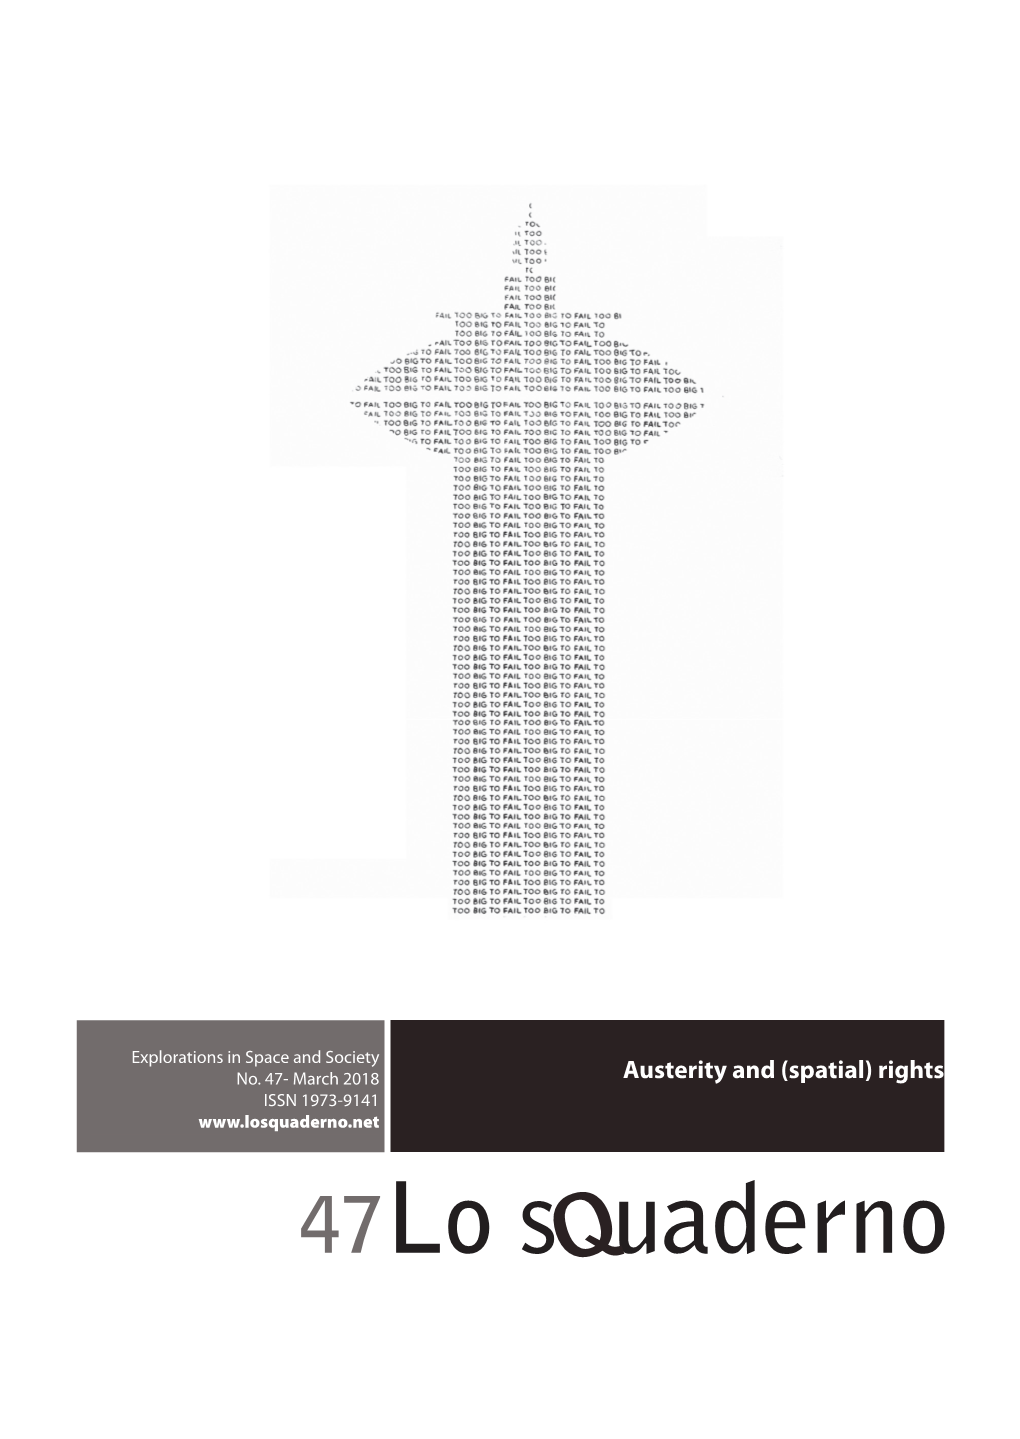 Lo Squaderno Aims at Contributing to This Debate with a Collection of Reflections Which Intercept Such Questions